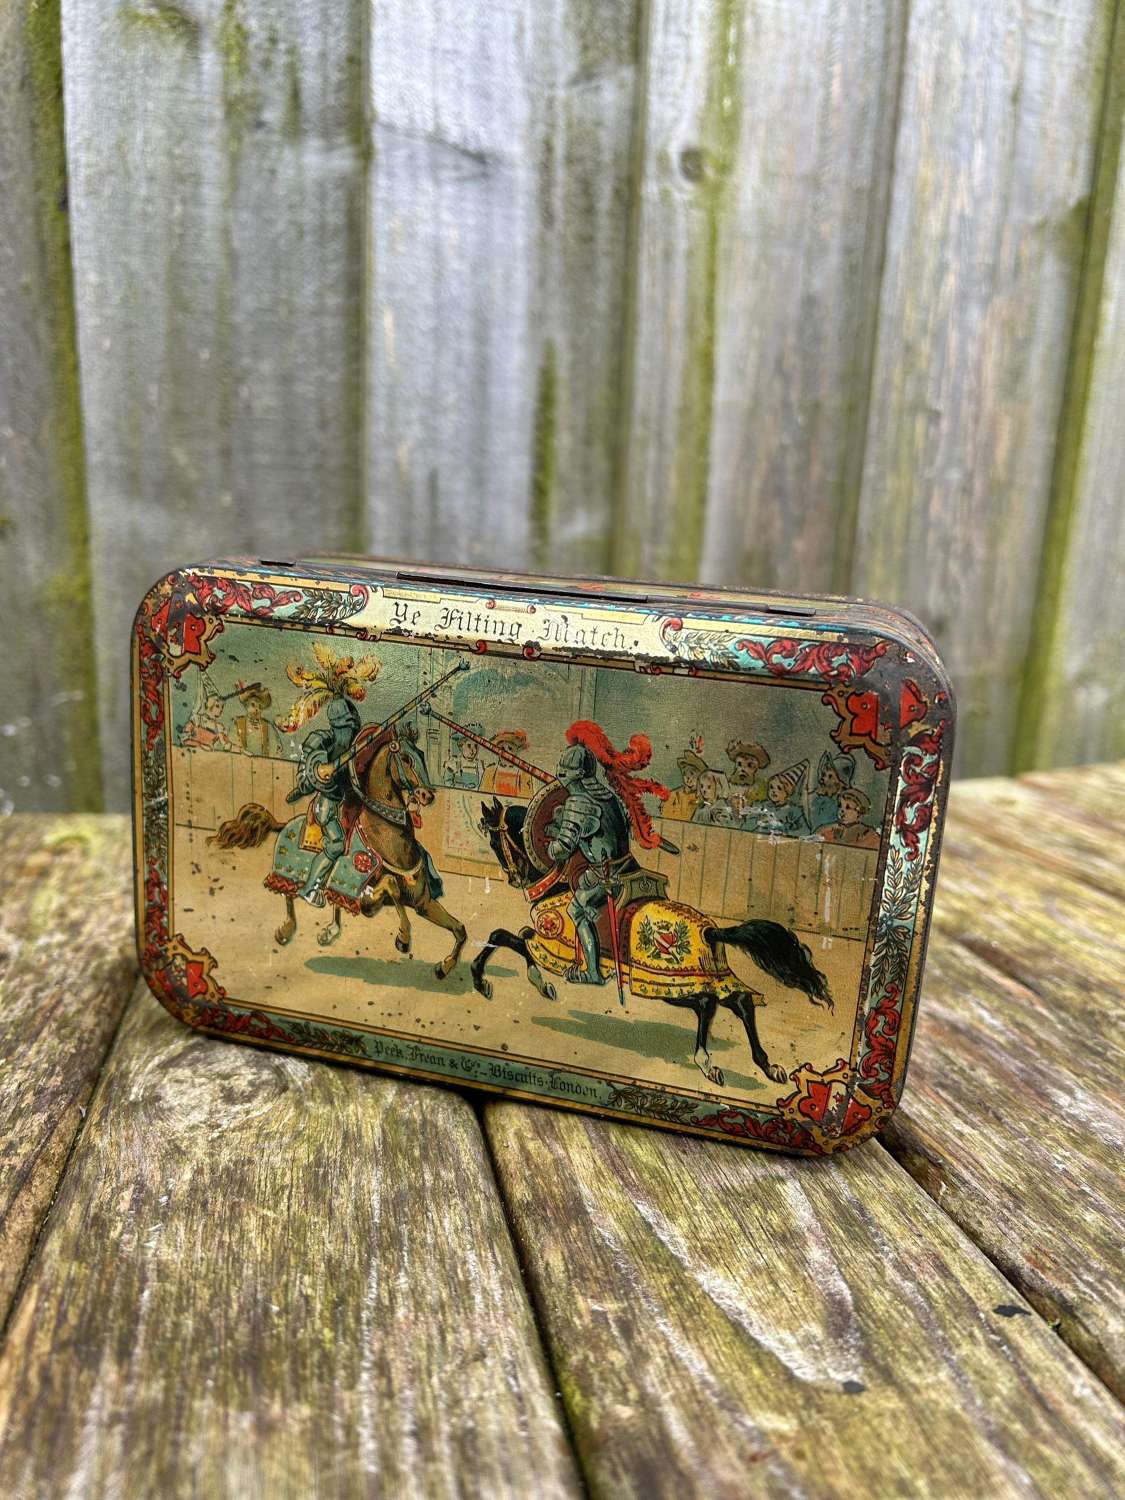 Early Peek freans jousting biscuit tin